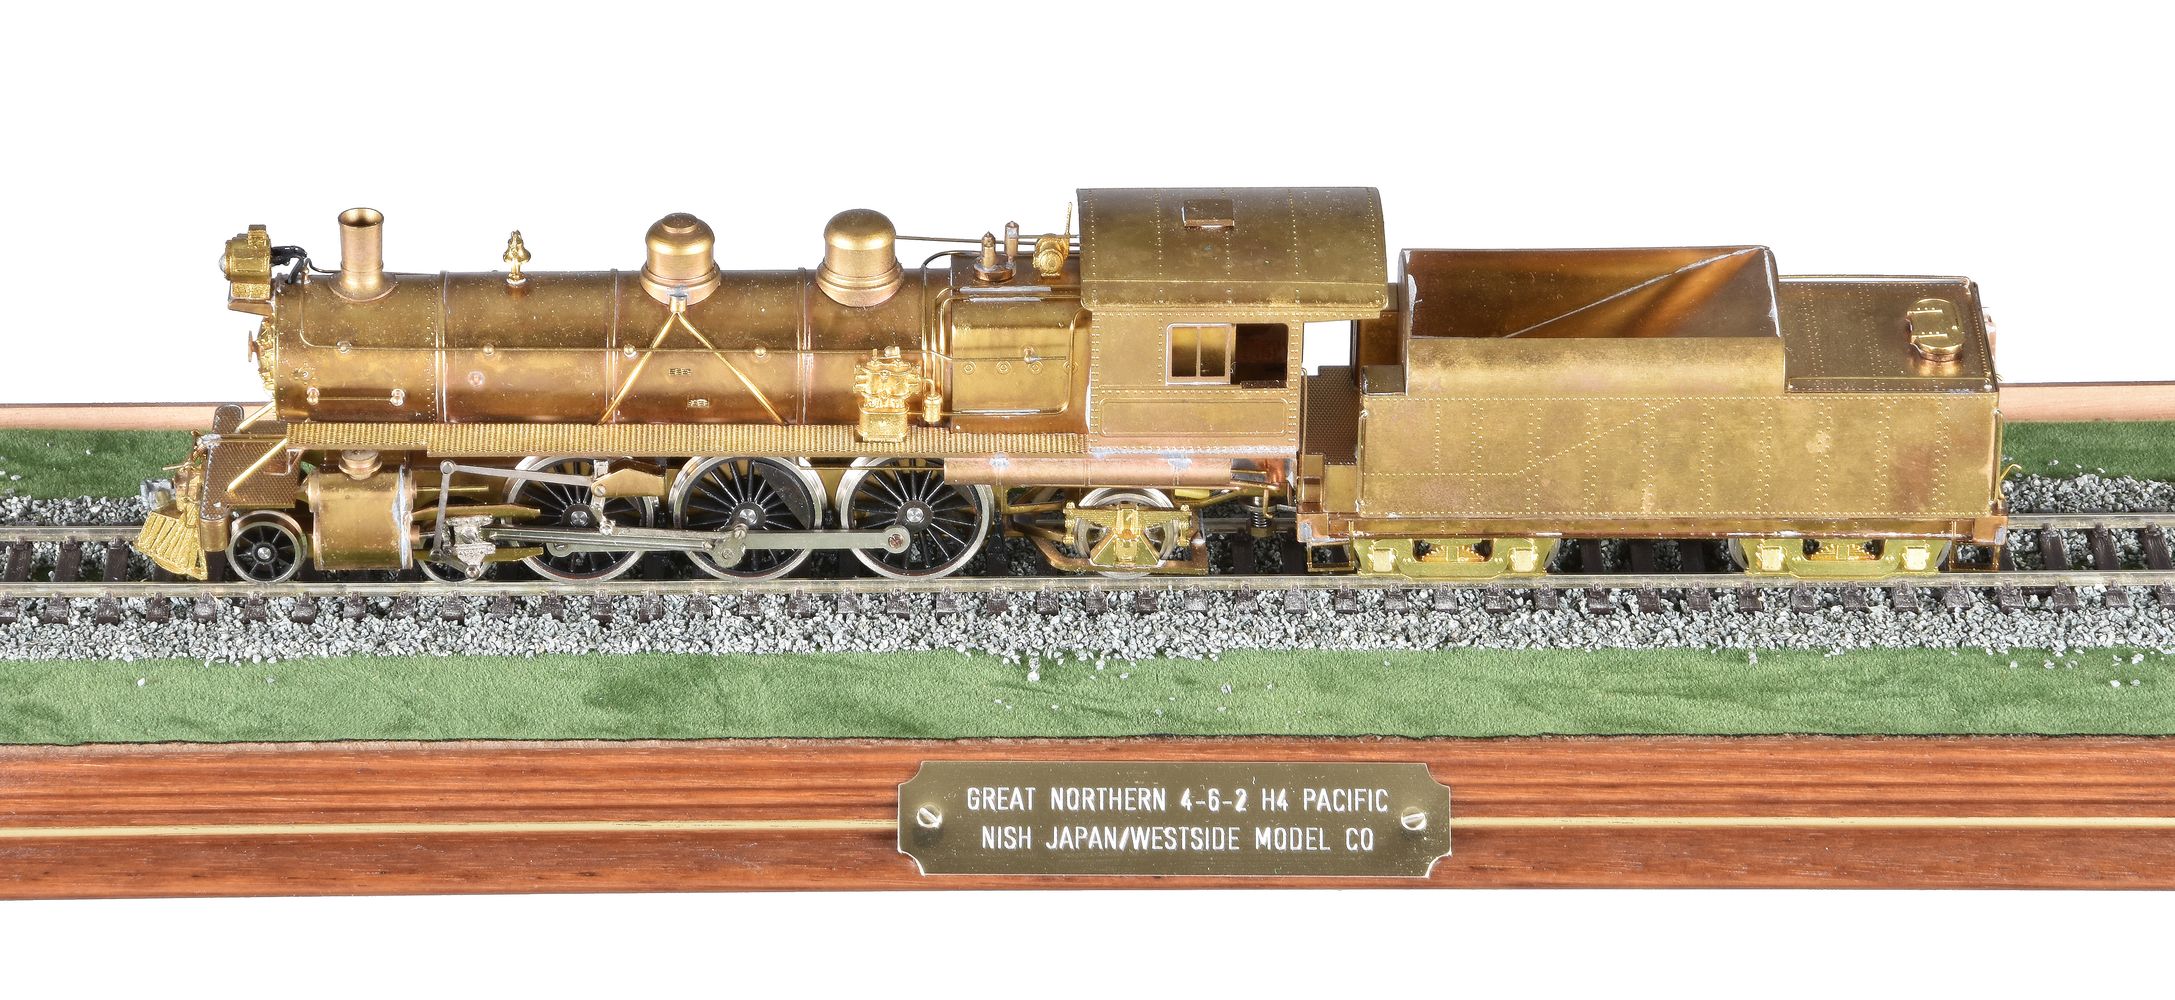 A HO gauge brass model of a Great Northern Railroad Class H-4 4-6-2 Pacific tender locomotive